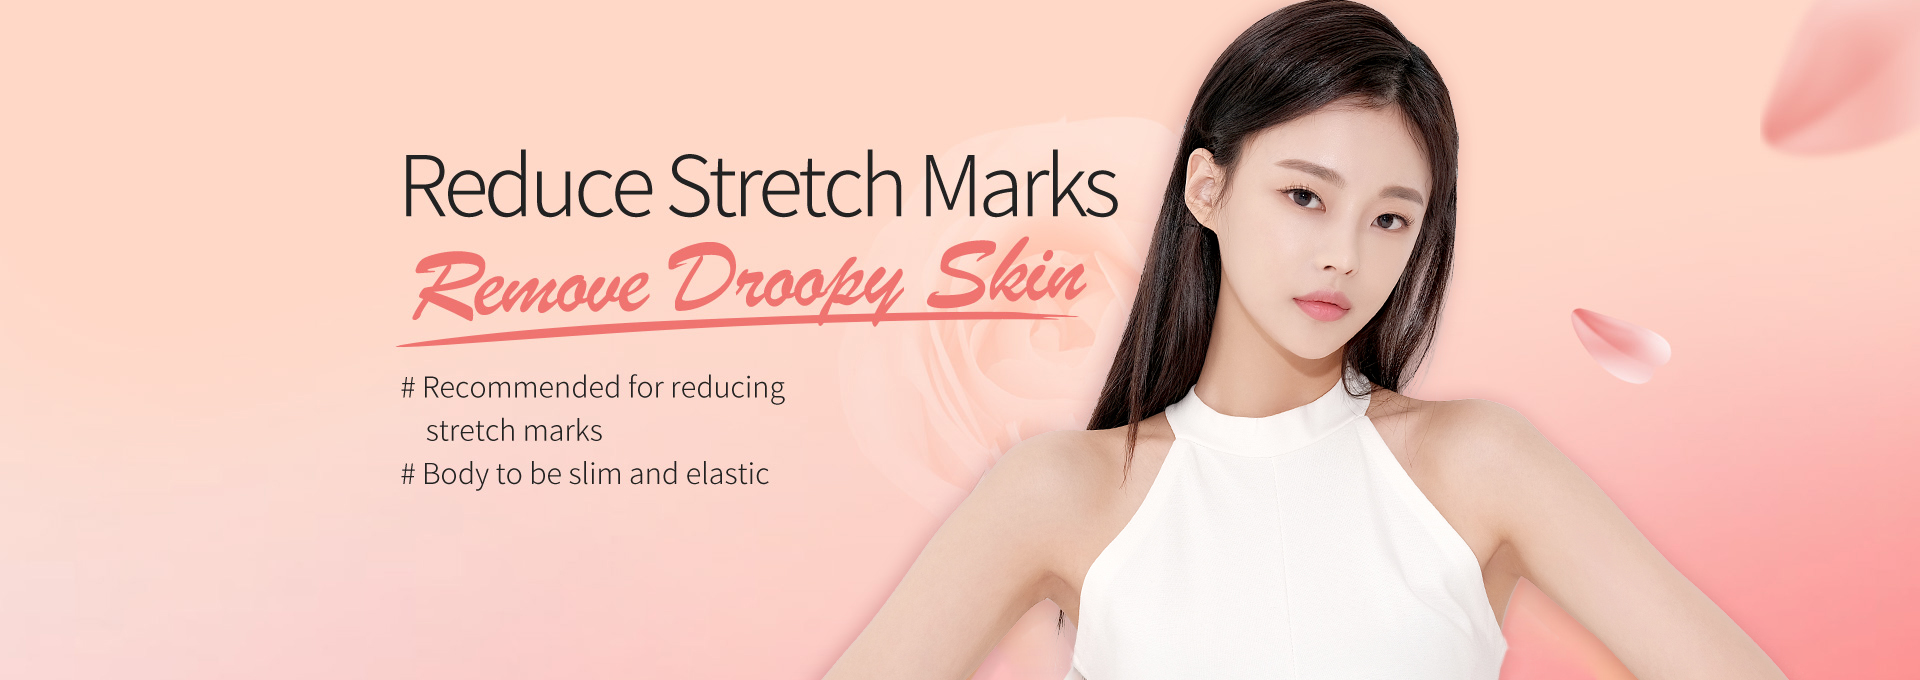 Reduce stretch marks remove droopy skin